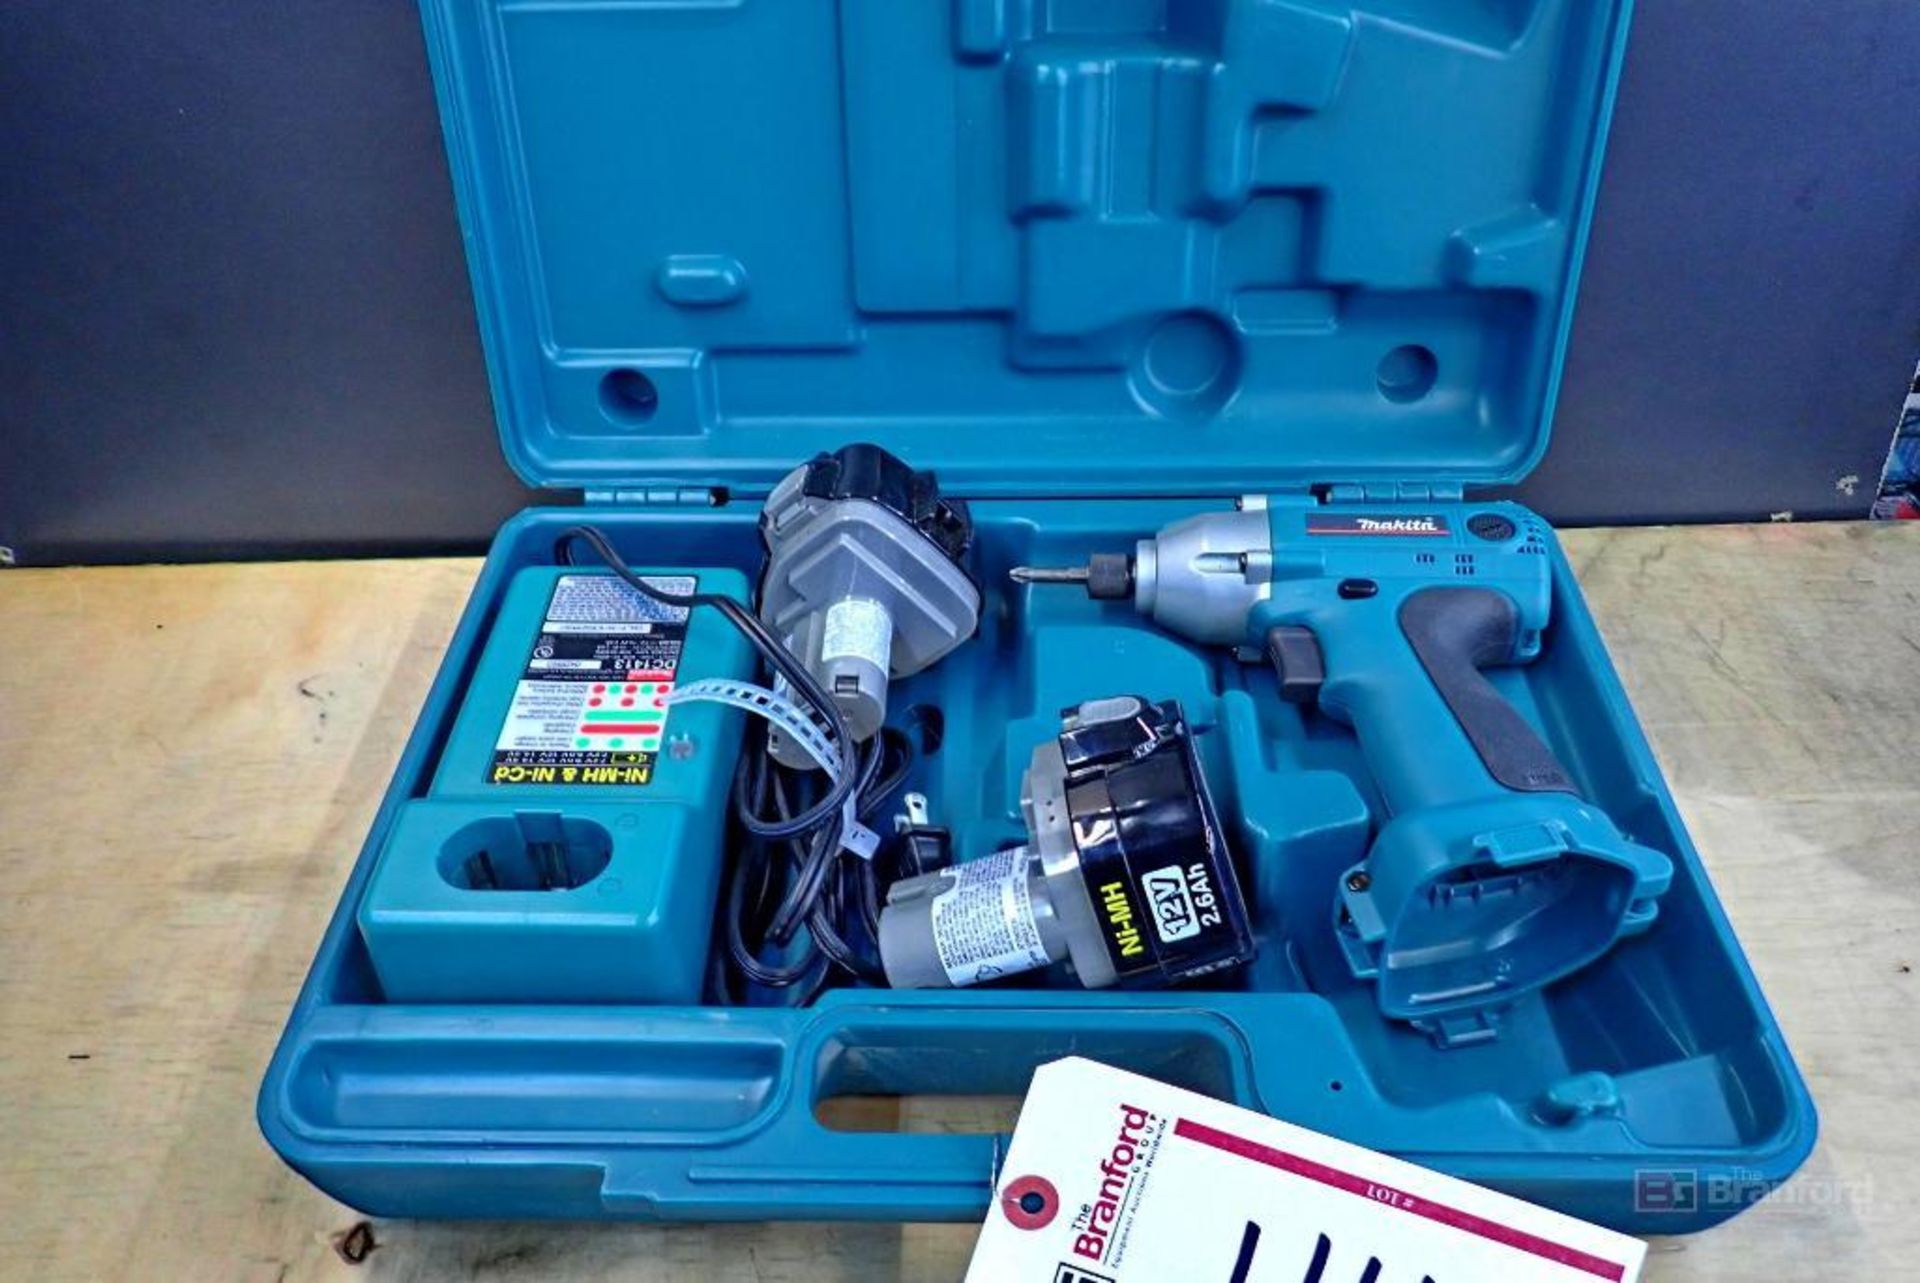 Makita 6916D Cordless Driller / Driver w/ DC1413 Charger